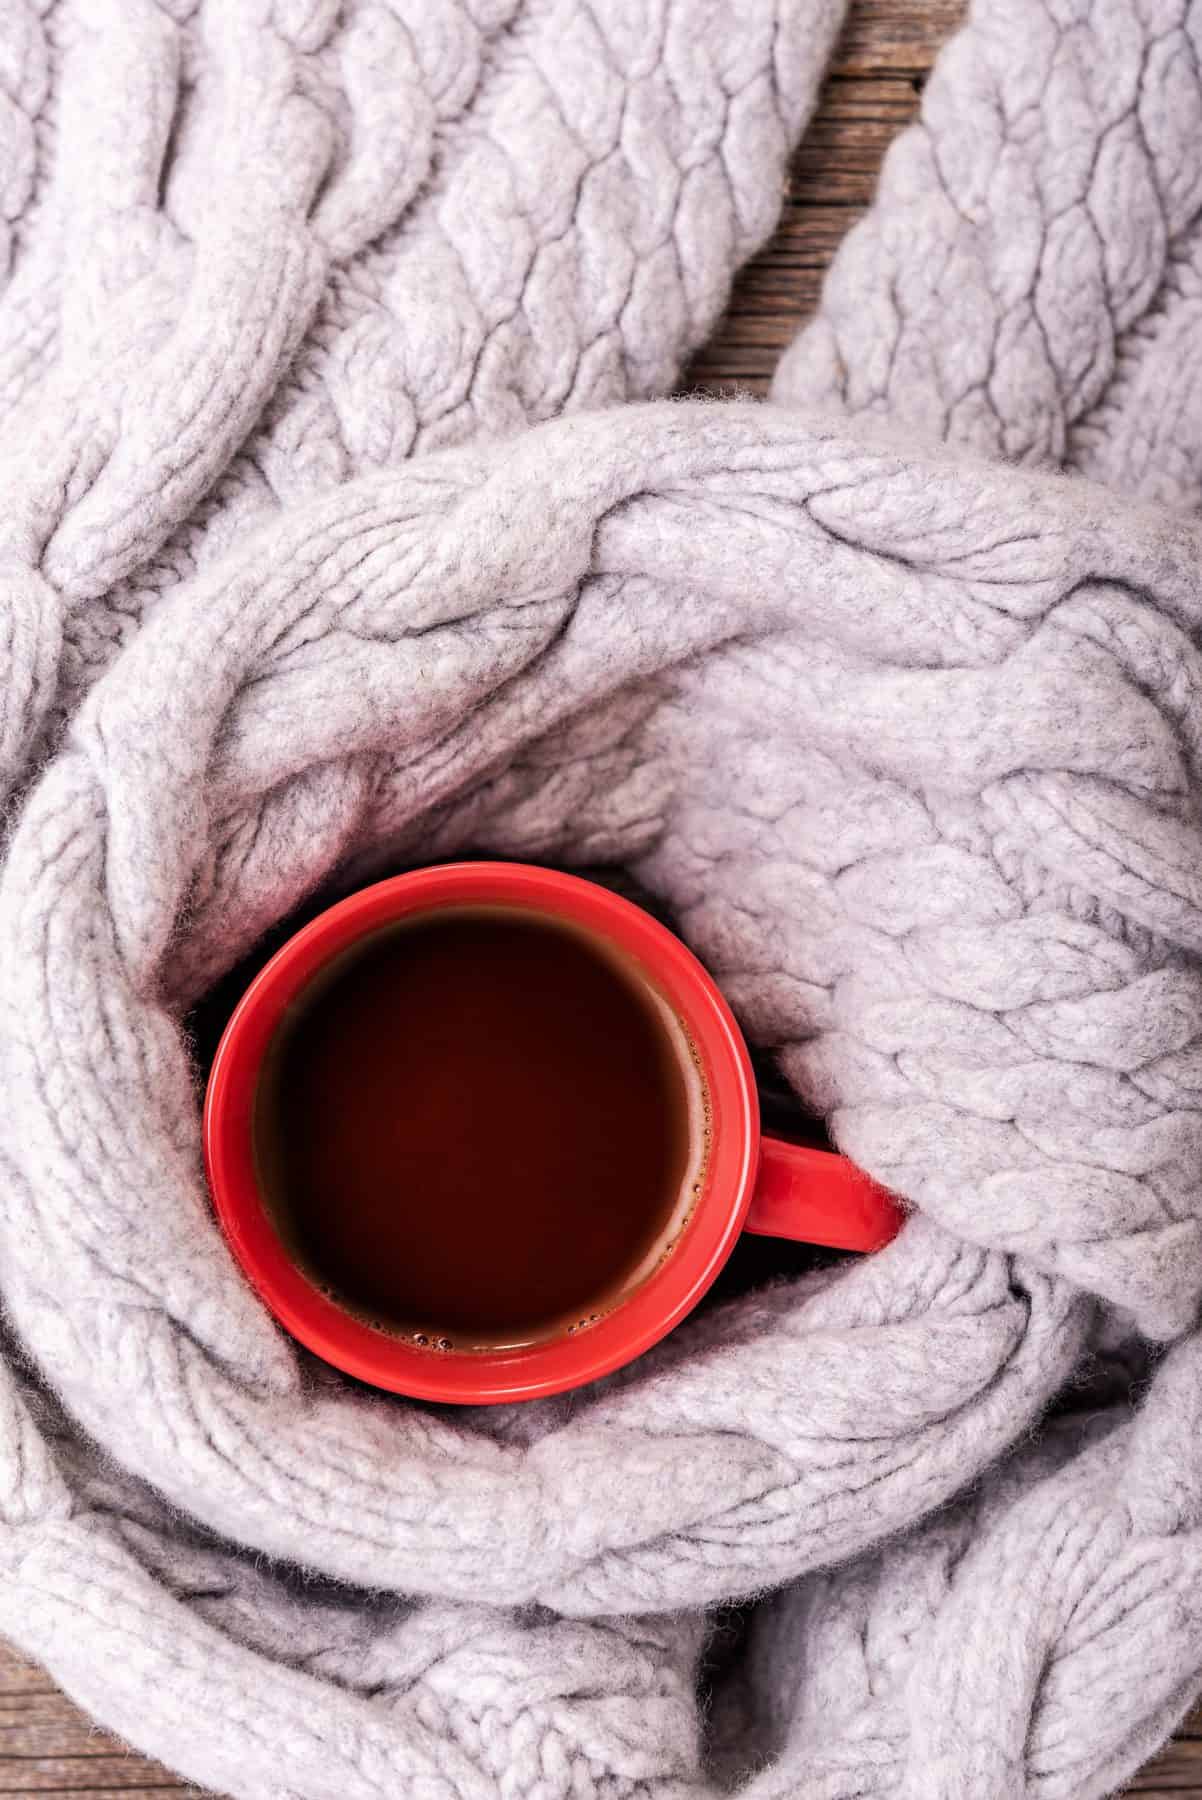 A scarf is wrapped around a red cup full of tea.